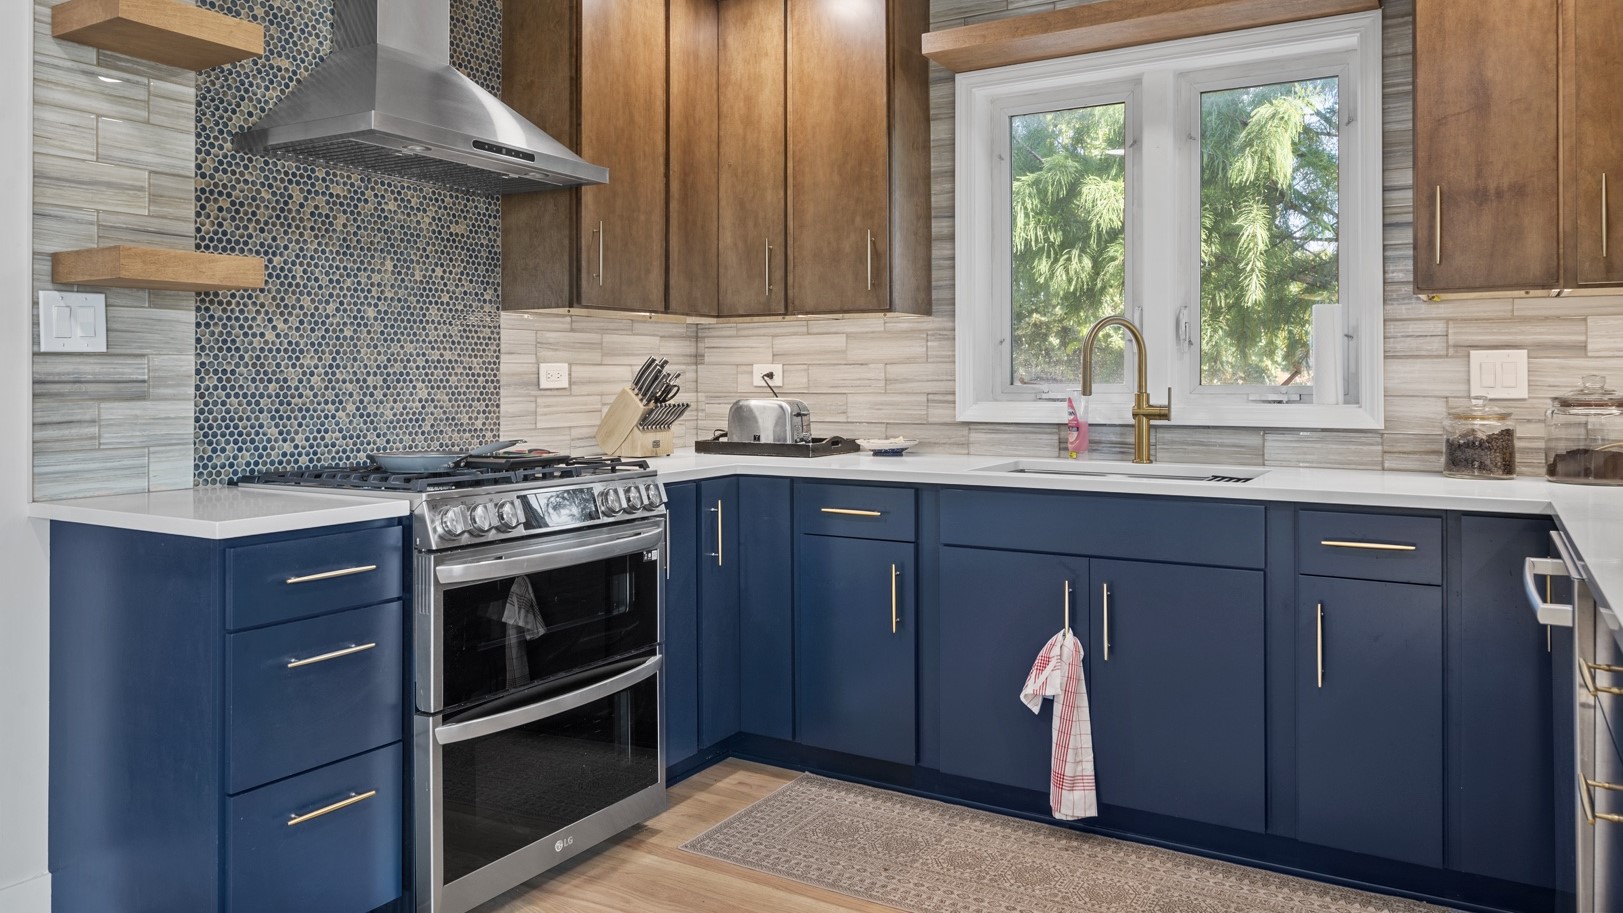 Modern kitchen remodel with beautiful wood floors, marble countertops, and blue cabinetry by 4Ever Remodeling in Oak Park, IL